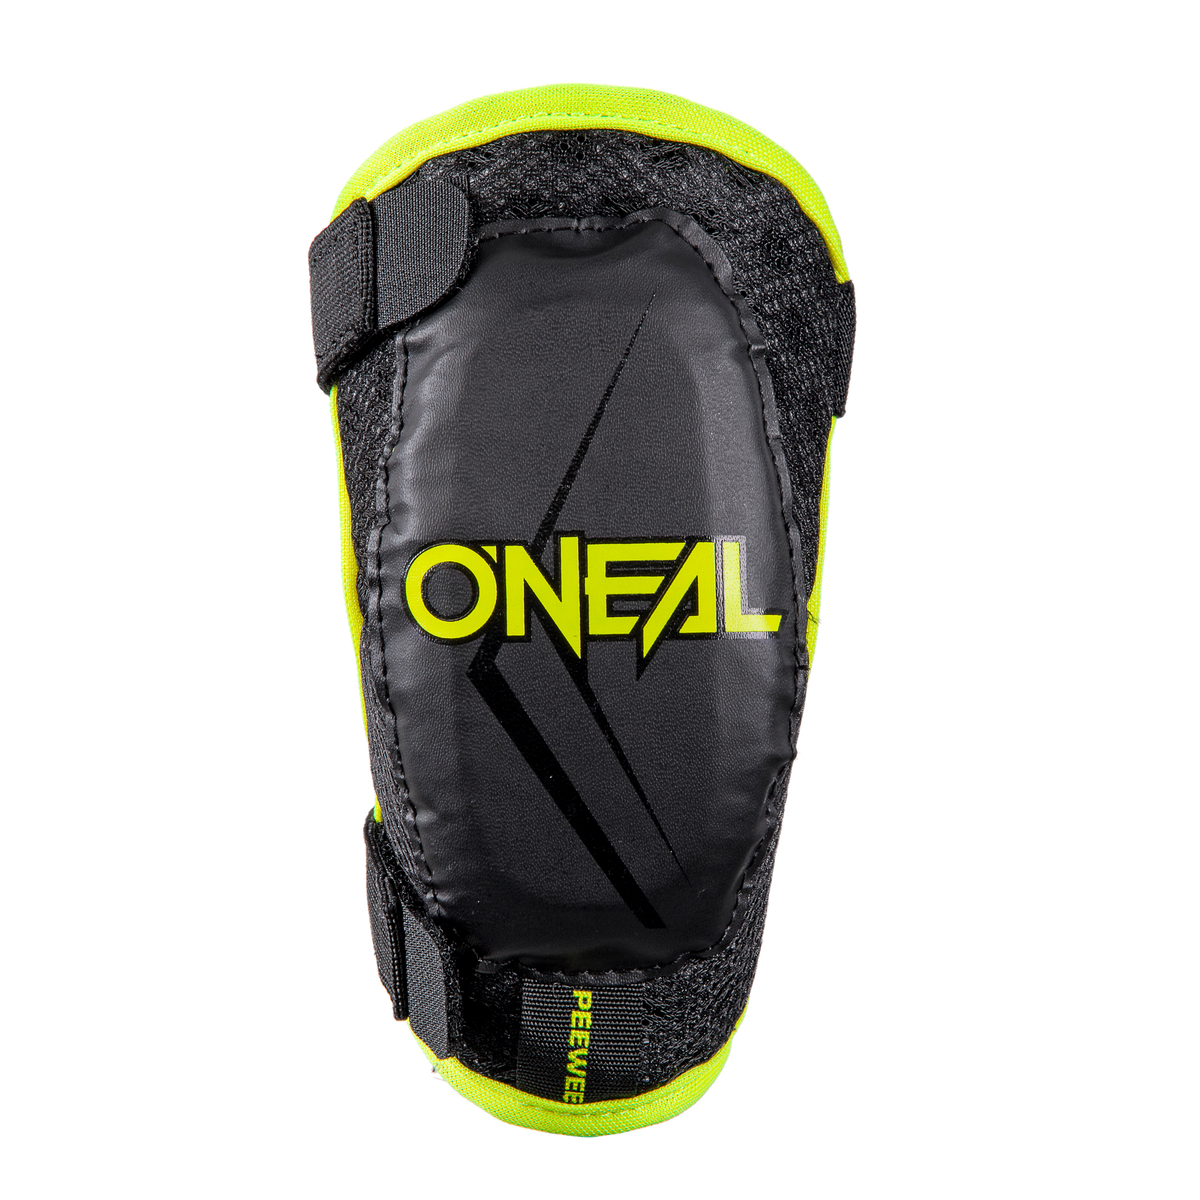 https://cdn.oneal.eu/assets/importedProductImages/PROTECTION/YOUTH/ELBOW/PEEWEE/neon%20yellow/2019_ONeal_PEEWEE_Elbow_Guard_neon%20yellow.png